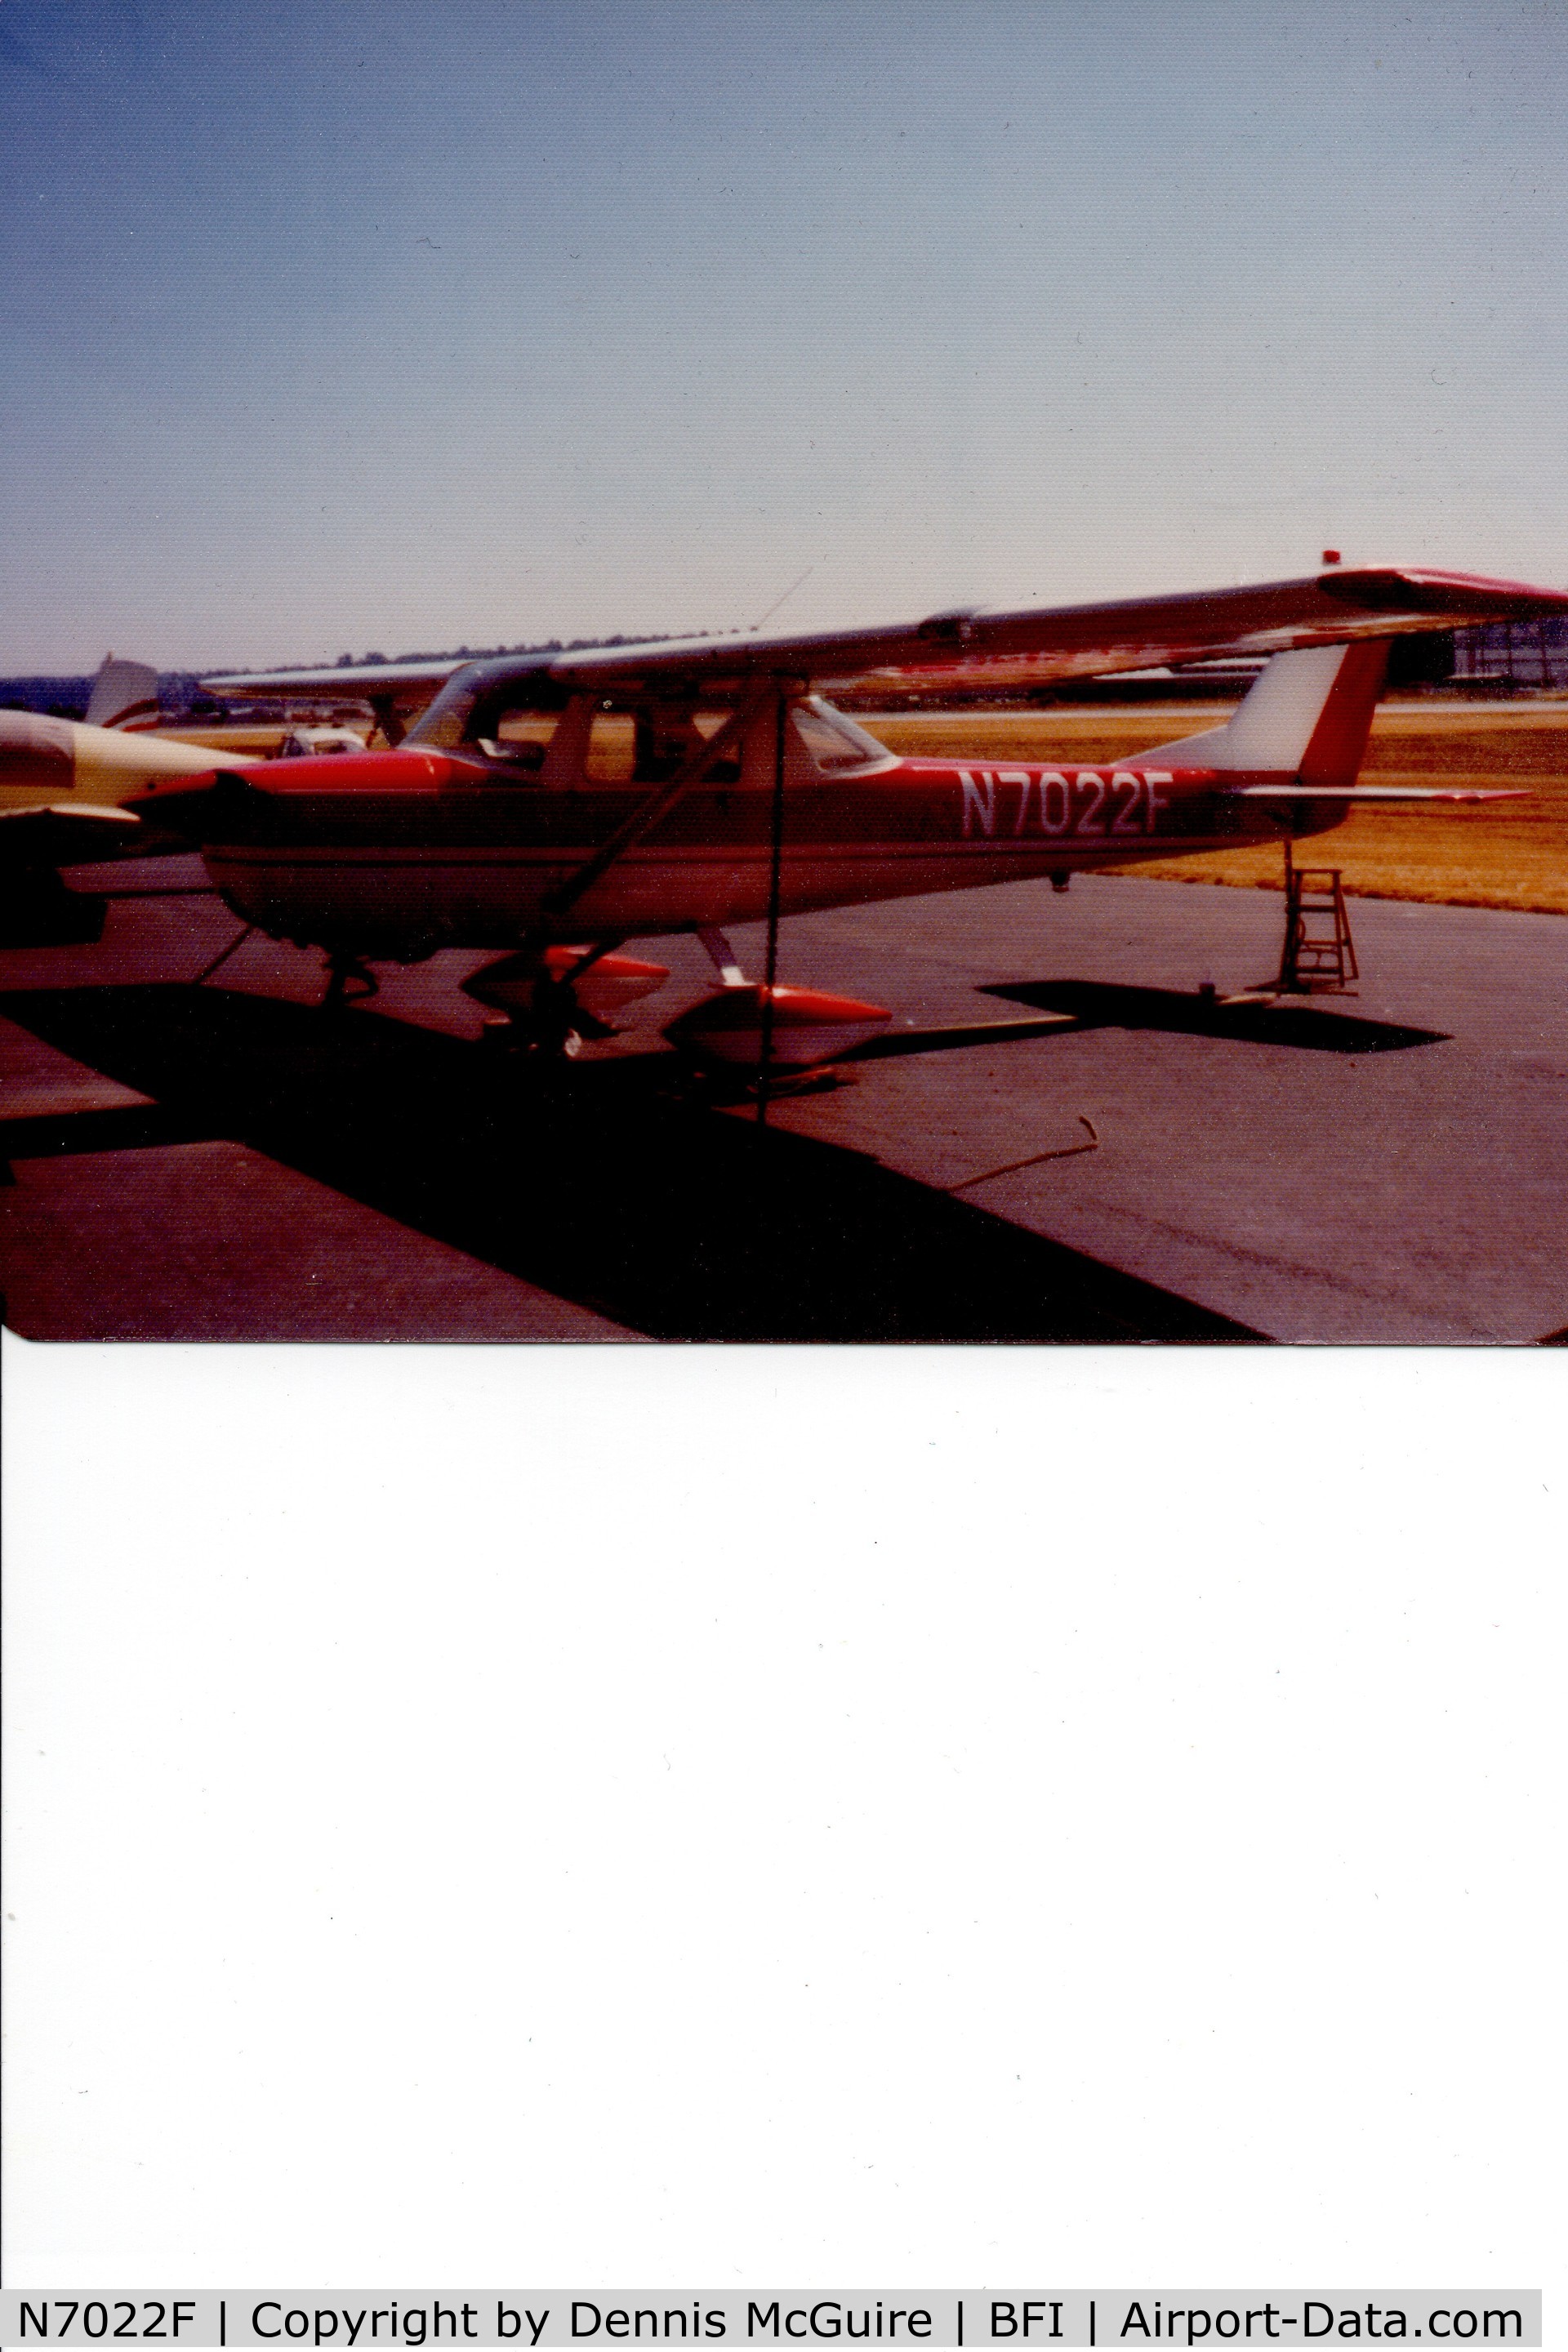 N7022F, 1966 Cessna 150F C/N 15063622, My brothers Cessna 150.  He owned it in the late 60's and early 70's